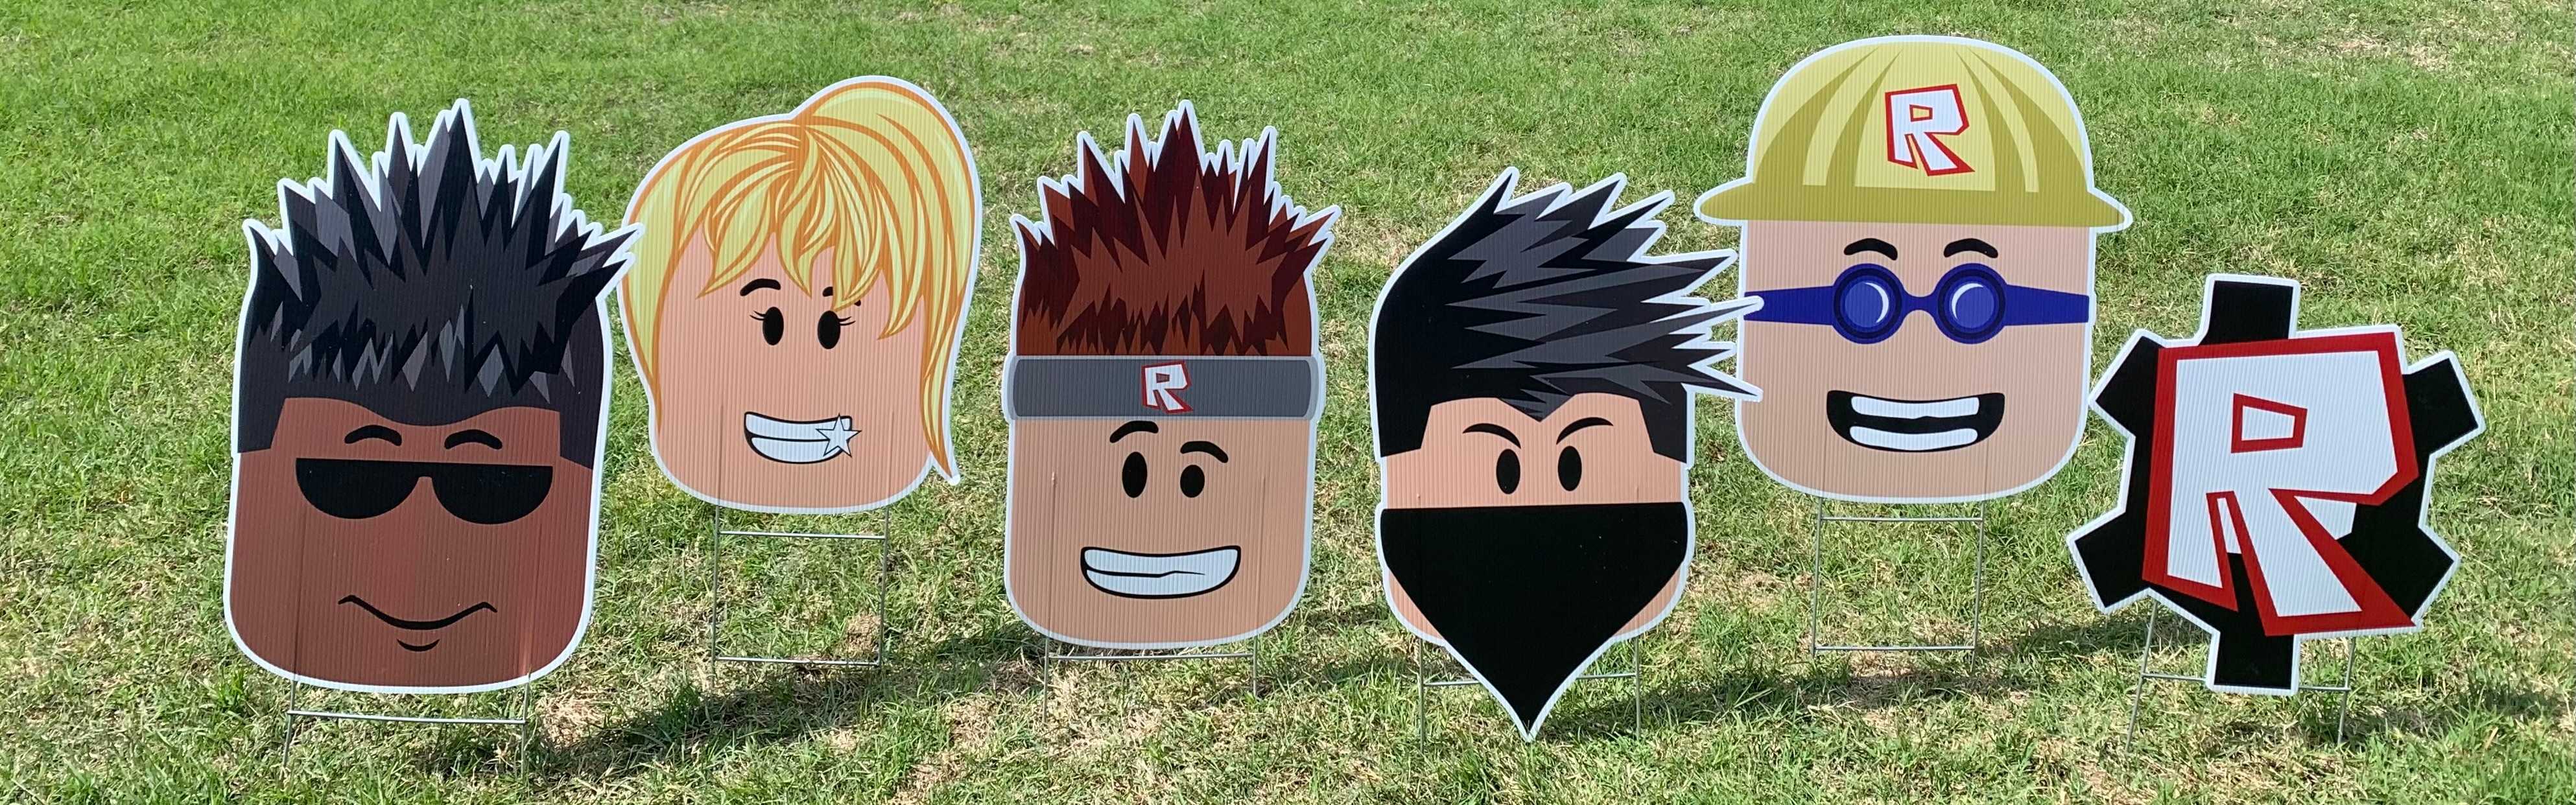 Yard card sign collection roblox 